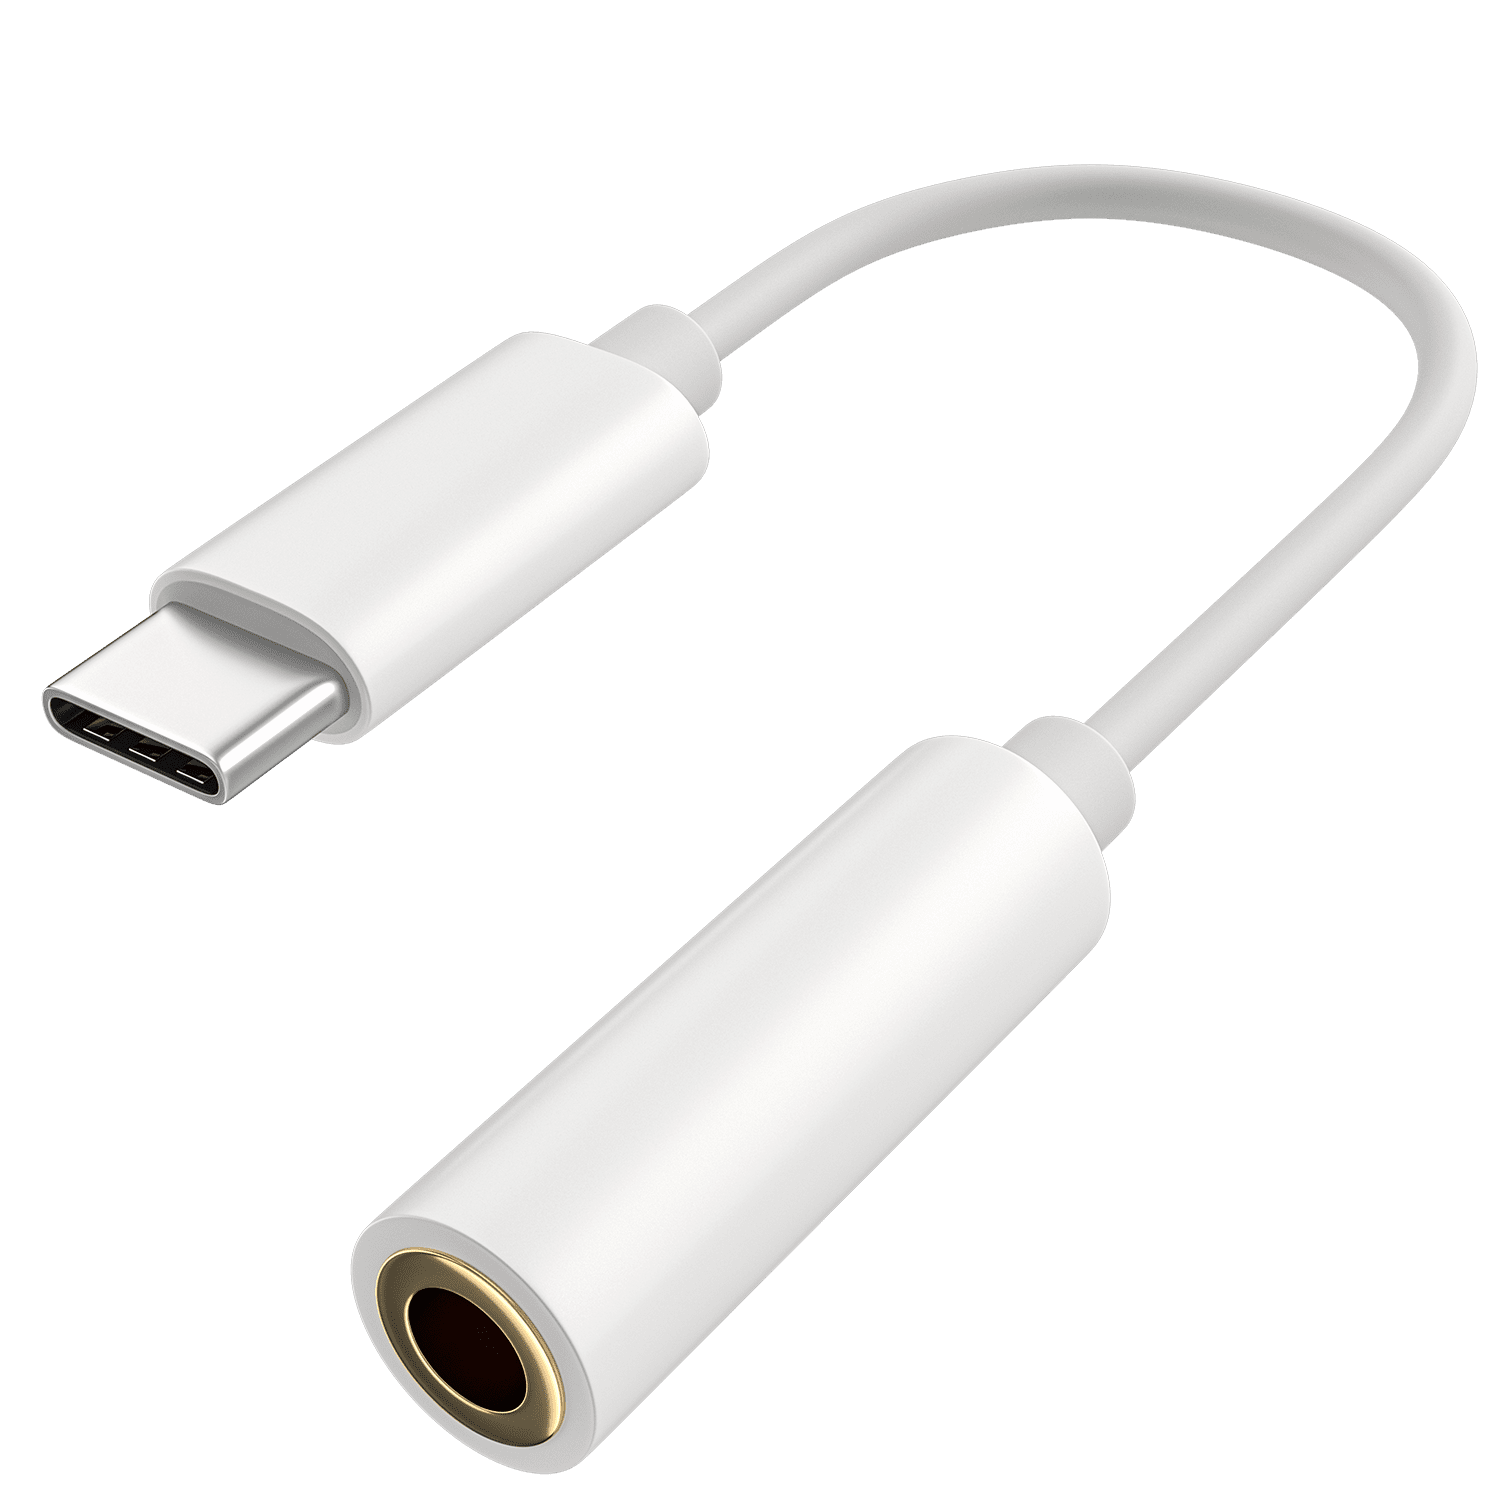 off mash forget USB C to 3.5mm Headphone Jack Adapter,Type C to Audio Converter TPU Cable  Compatible with Pixel 4 3 2 XL/iPad Pro/HTC U11/Essential/Huawei/Samsung  Galaxy Note 10 and More (White) 2-Pack - Walmart.com